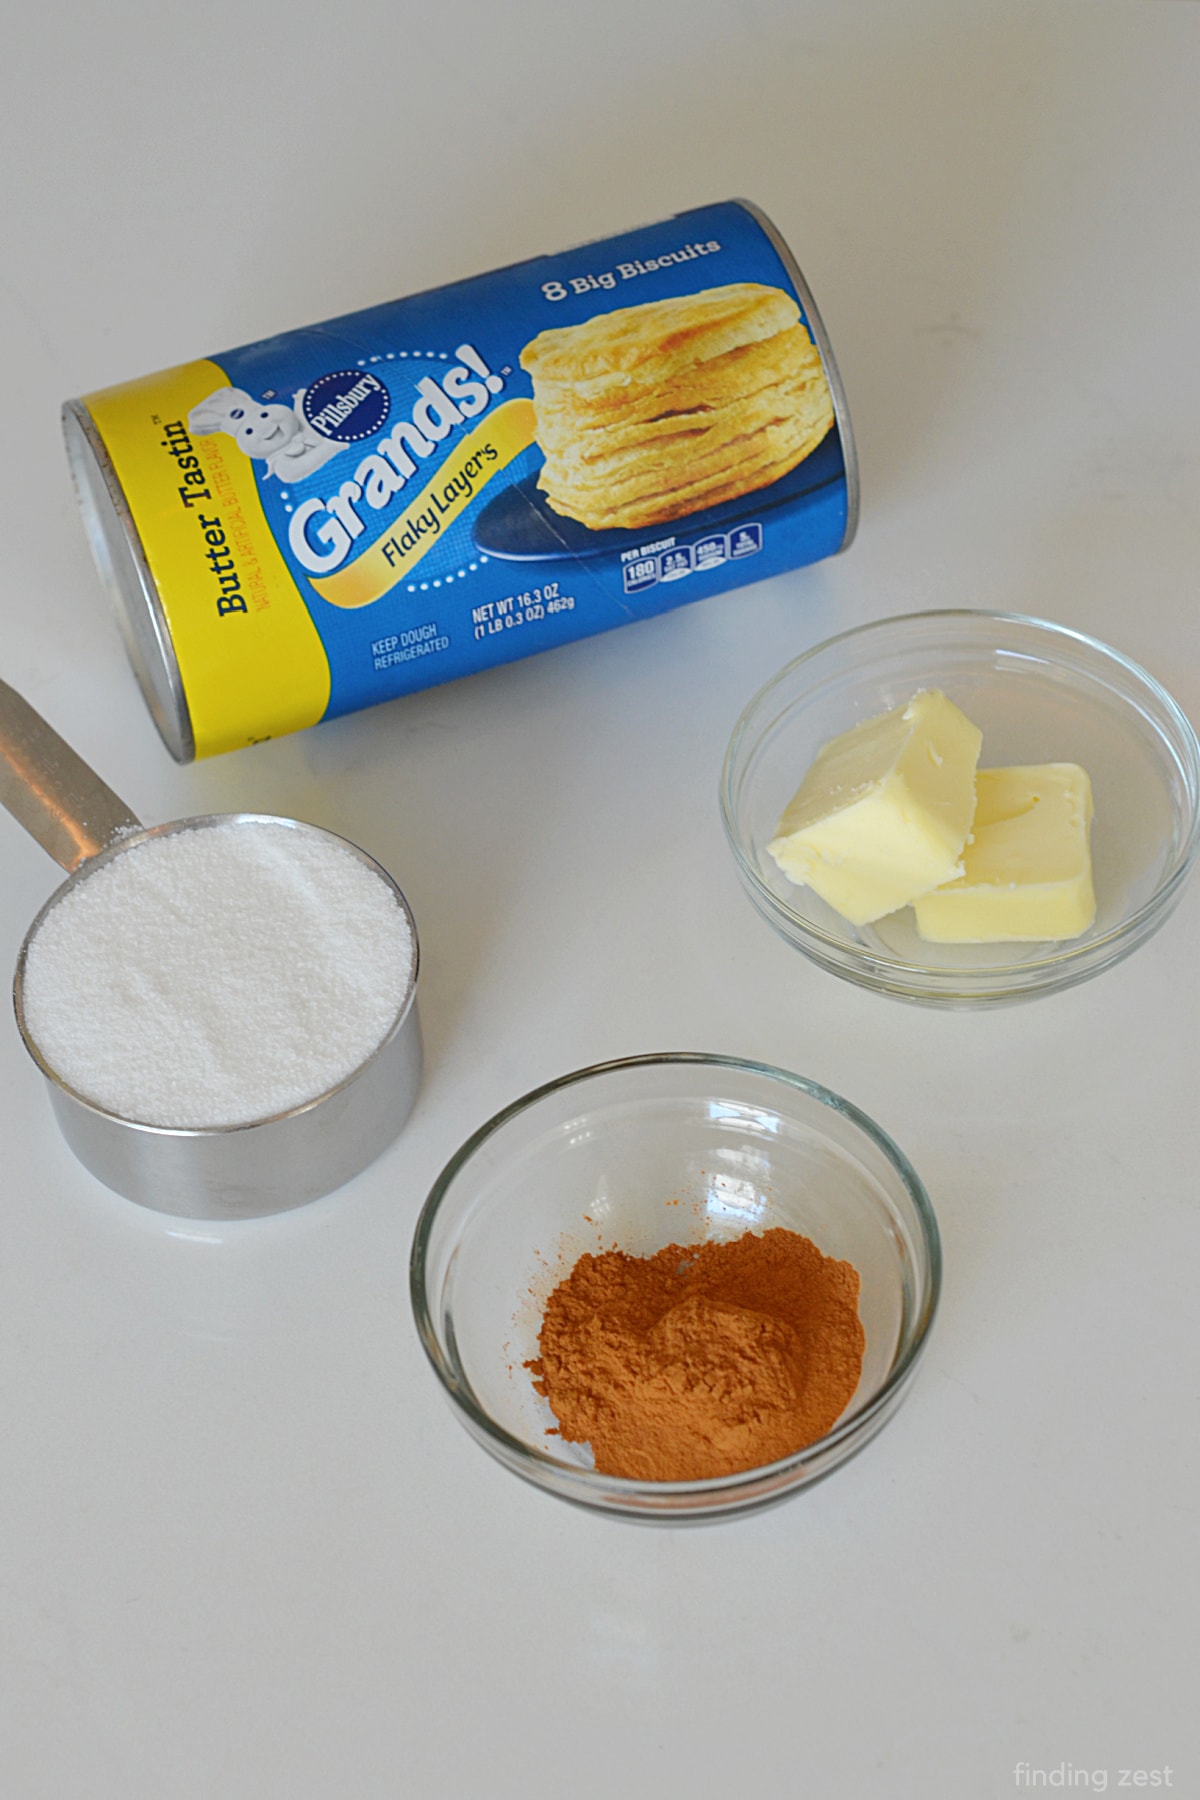 Ingredients for Air Fryer Donuts with Canned Biscuits